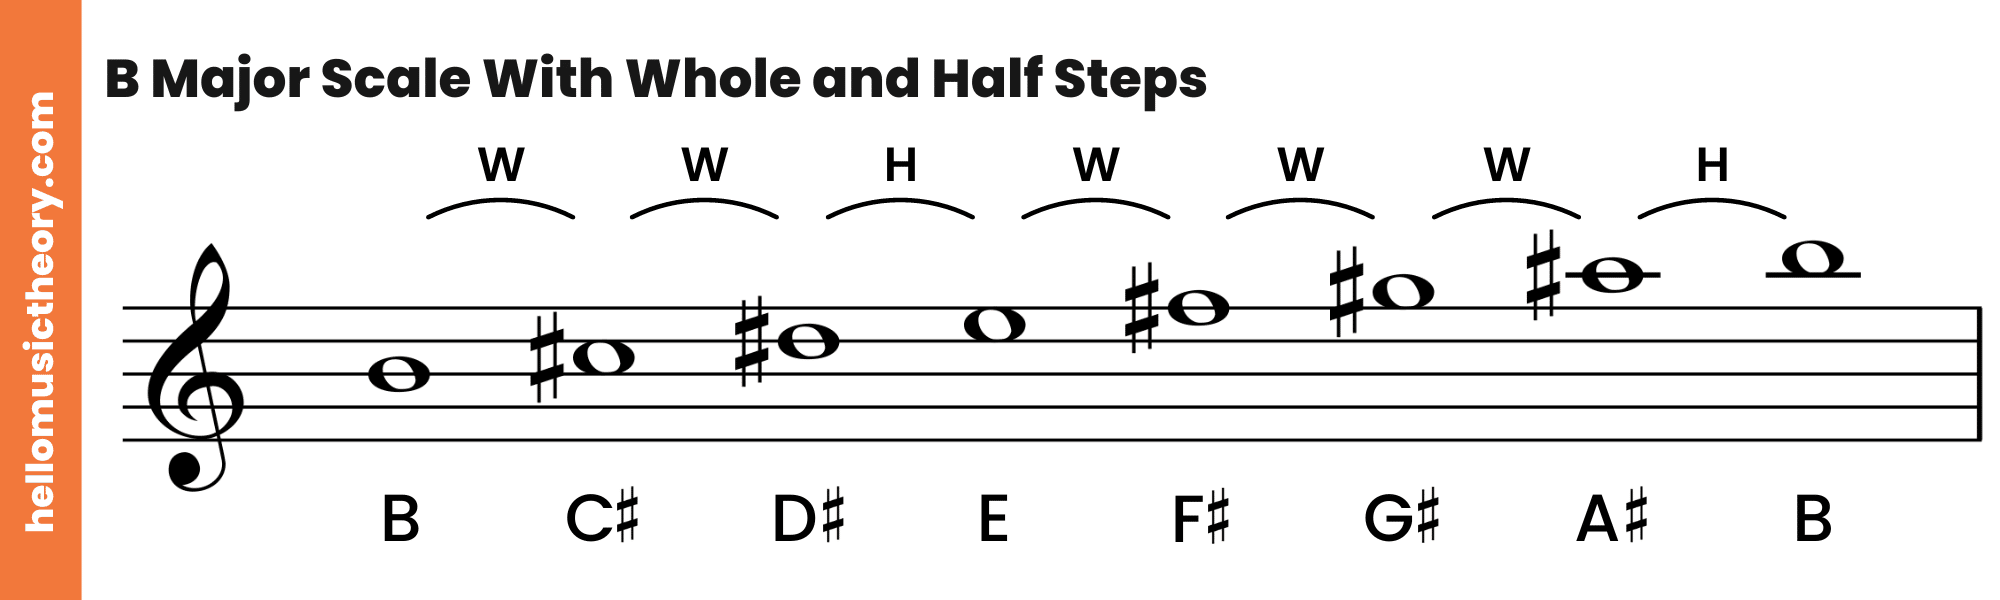 B Major Scale Treble Clef With Whole and Half Steps